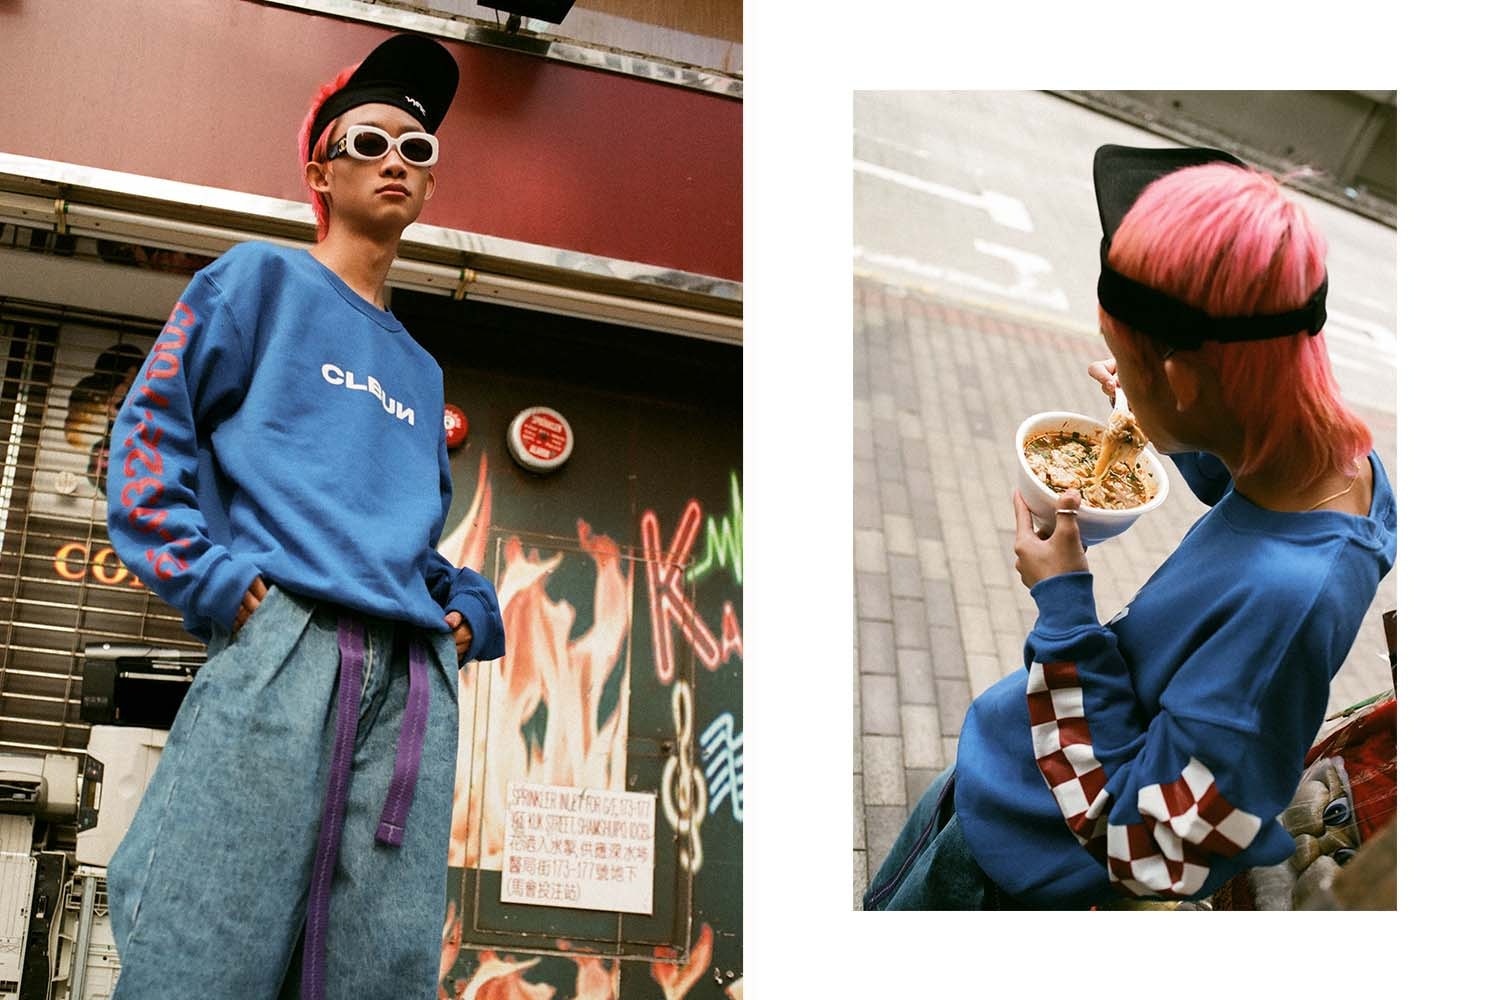 HBX Fall Winter 2017 Skypager Editorial CLBUN Loopy hotel streetwear fashion menswear 90s 2000s style clothing hip hop